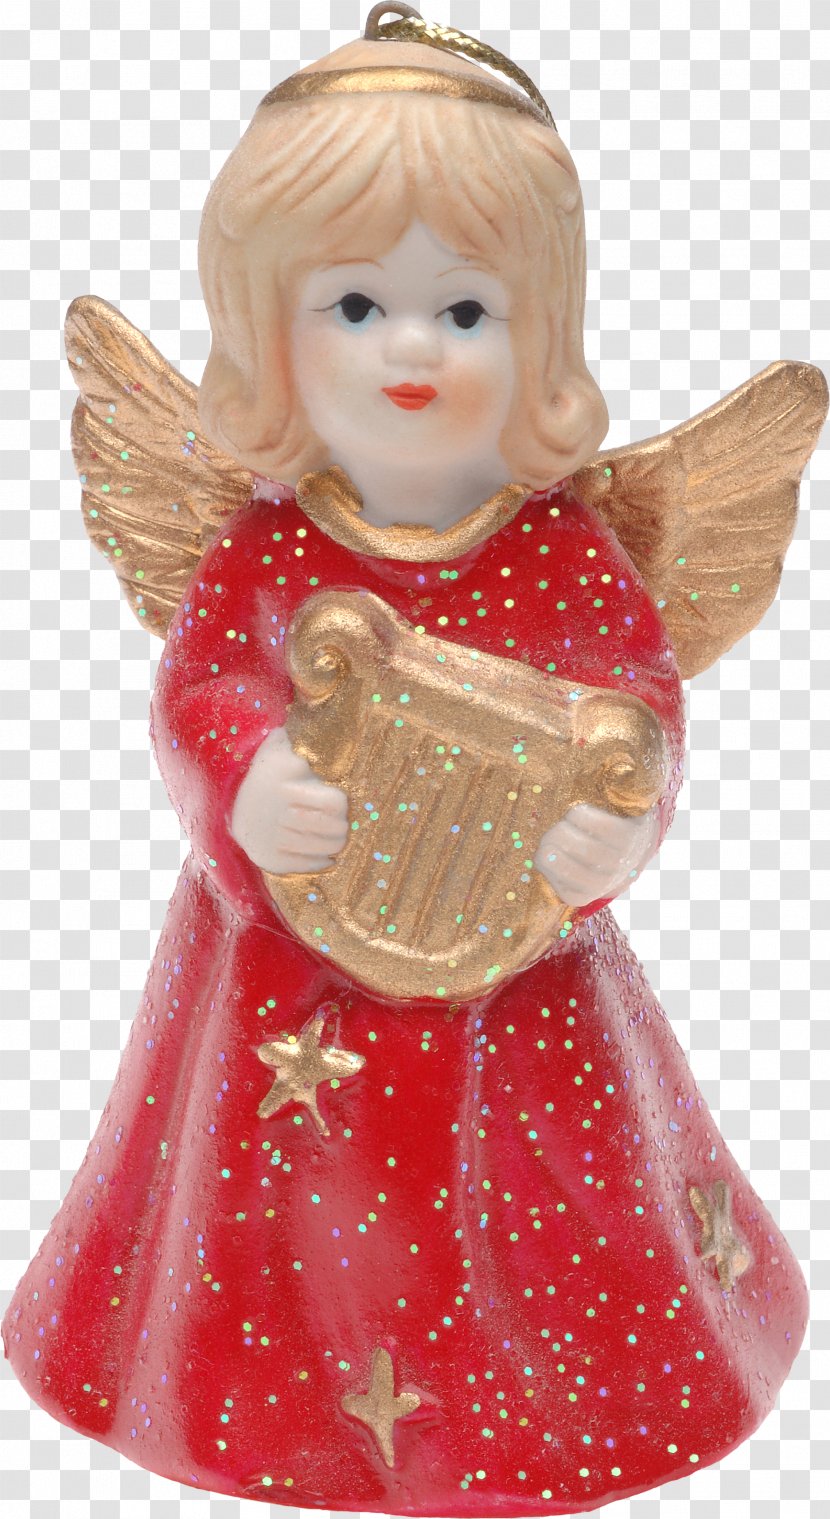 Christmas Ornament Decoration Day New Year - 2018 - Toy Angel Transparent PNG